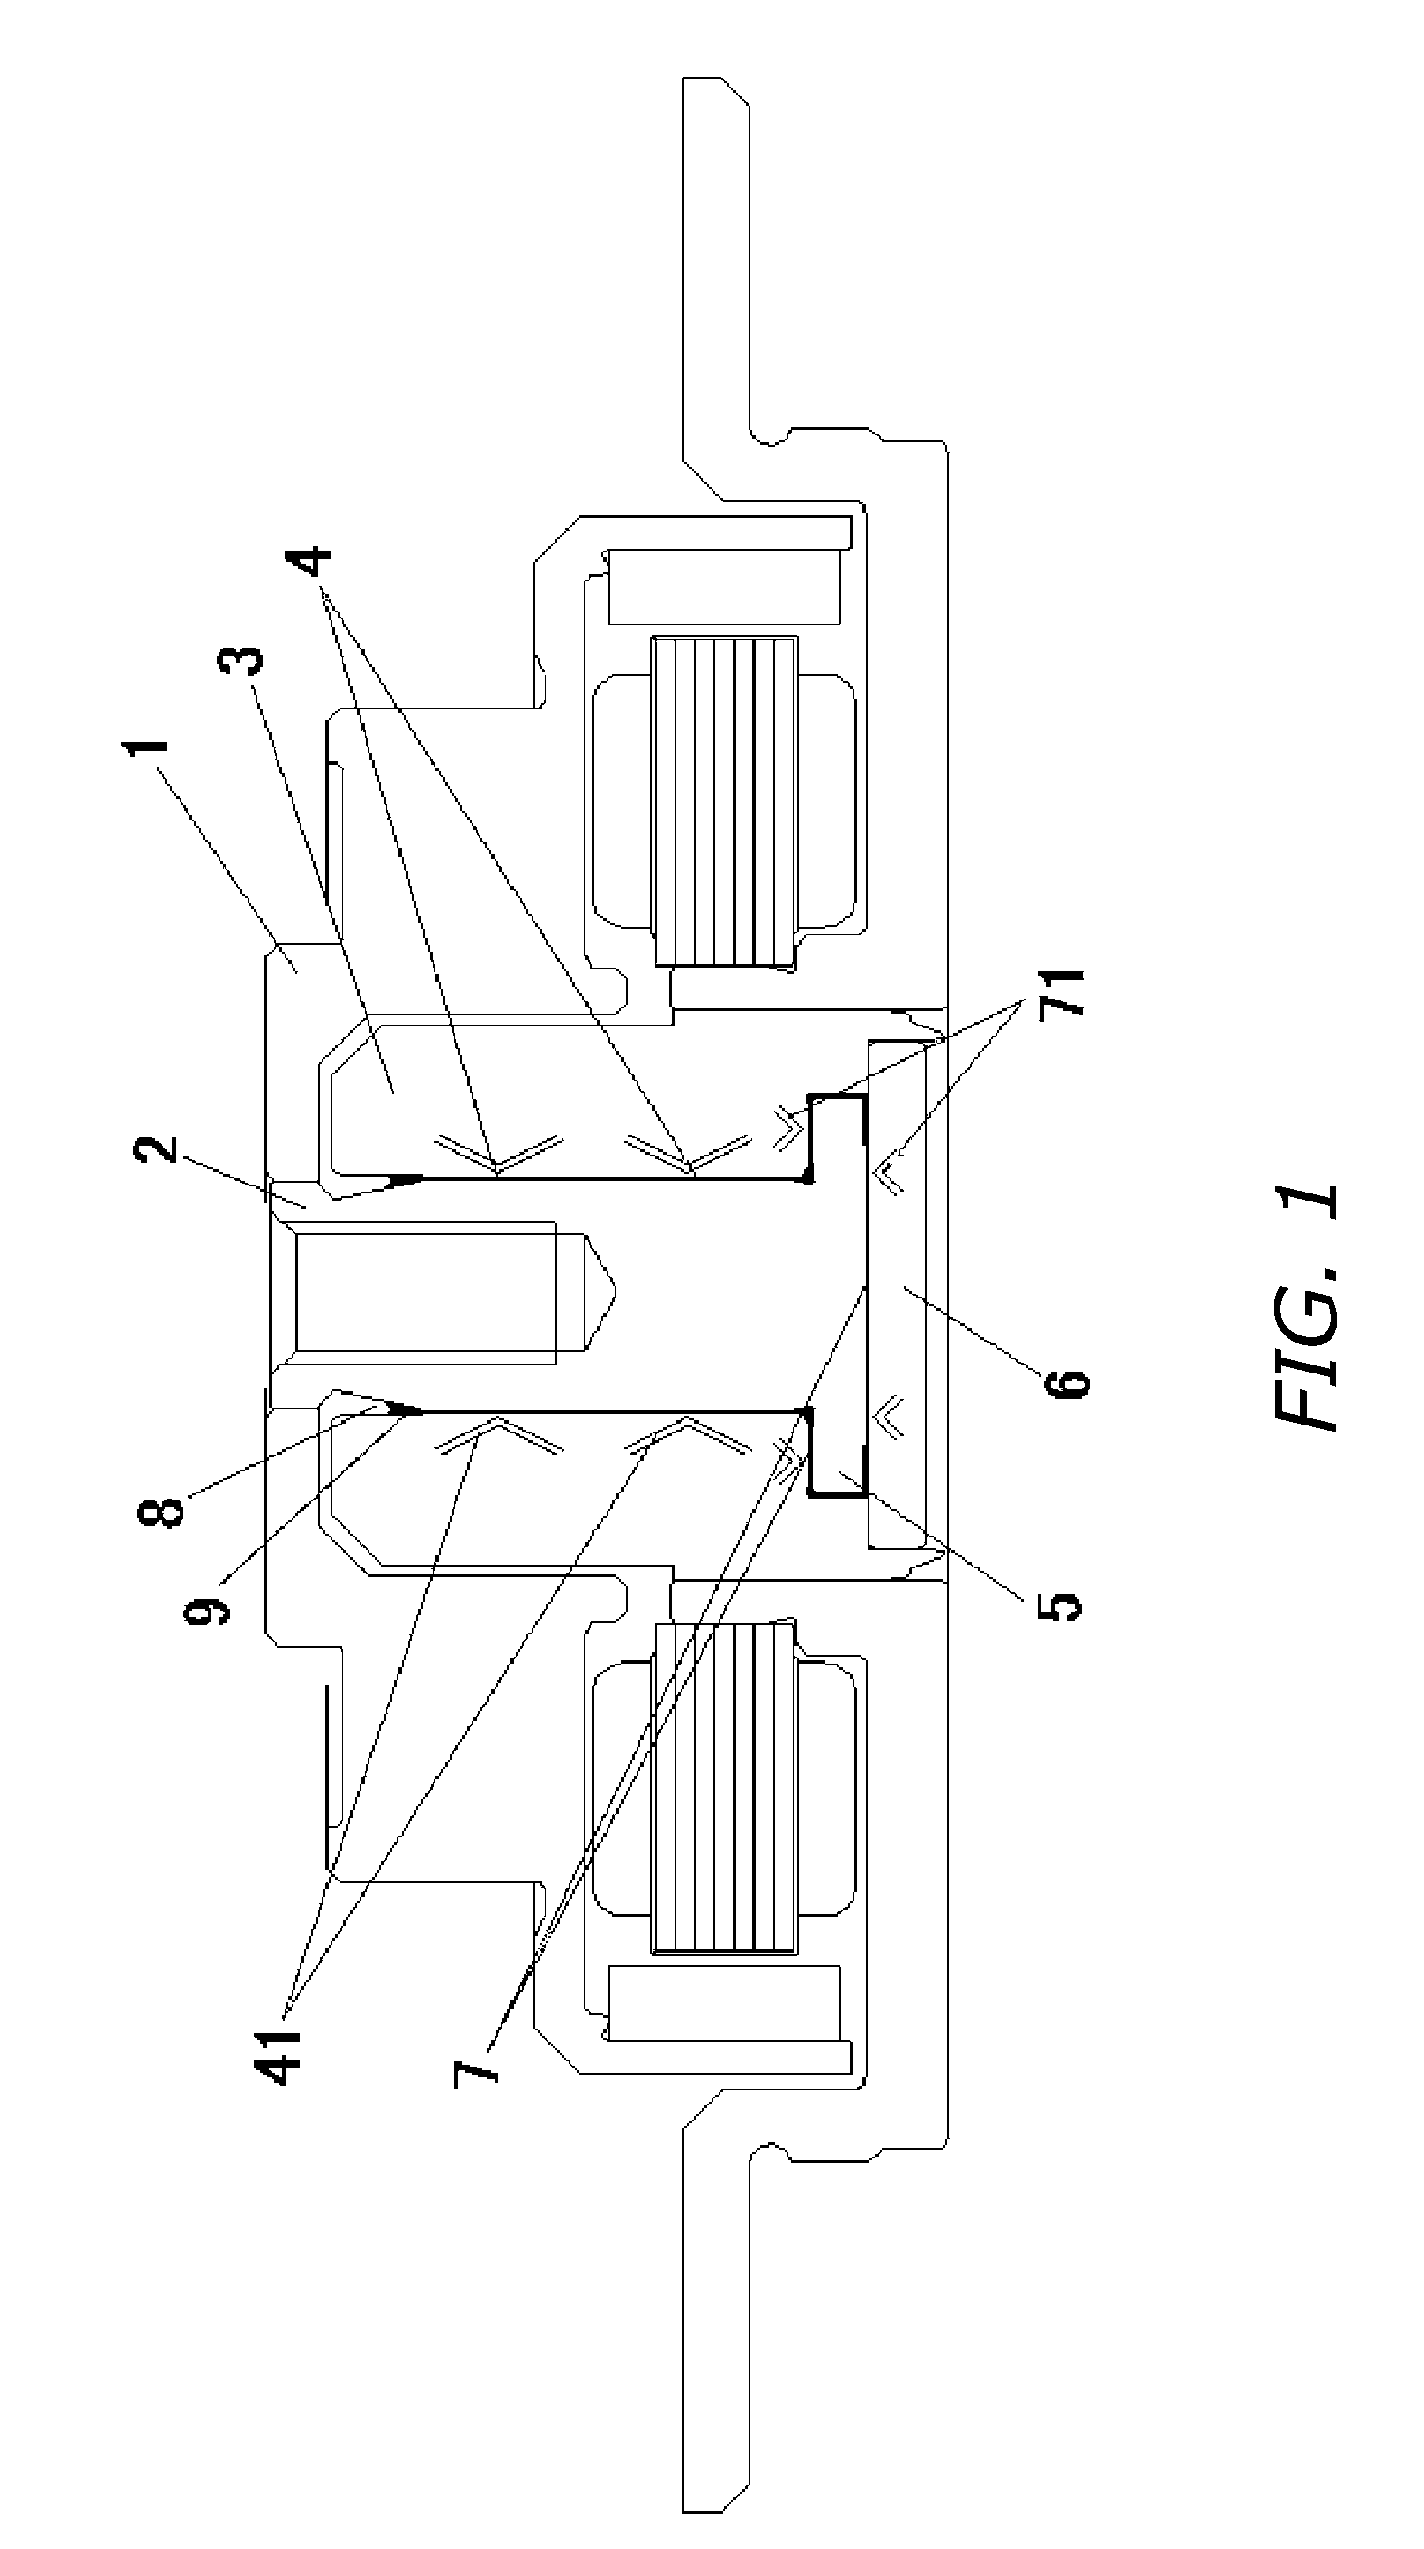 Method of Manufacturing, Including Method of Inspecting, Fluid-Dynamic-Pressure Bearing Units